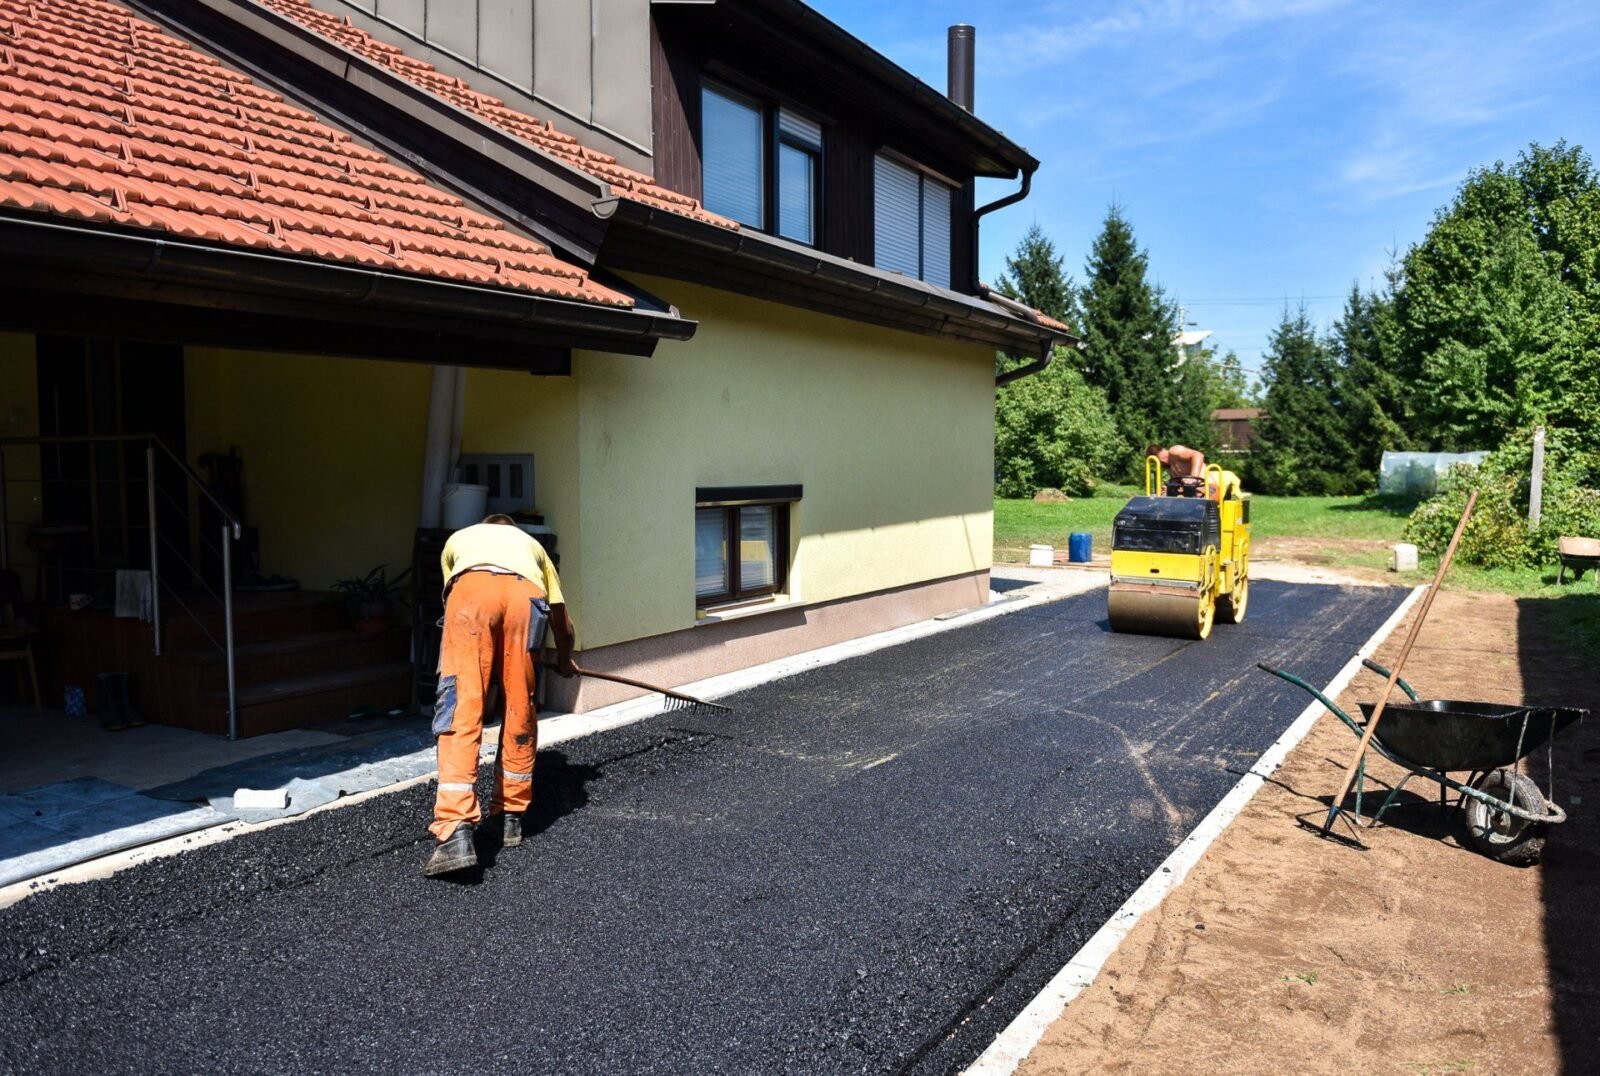 Asphalt contractors are sealcoating the pavement to improve the façade of the home.